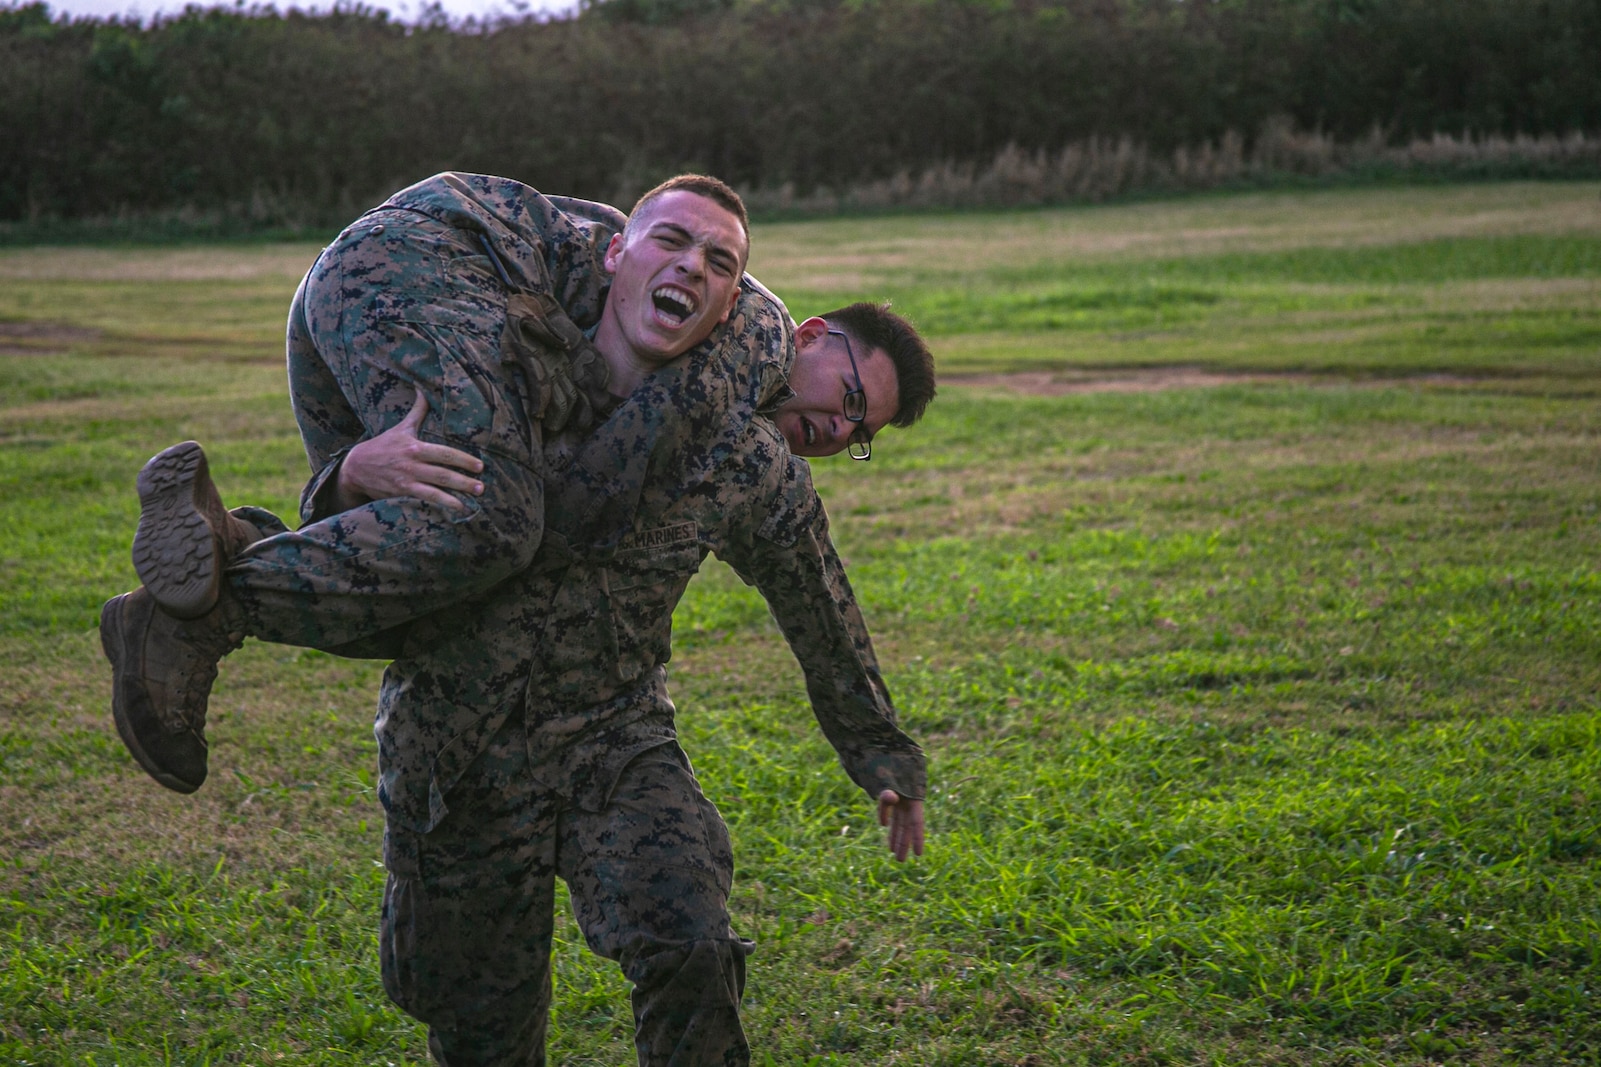 U.S. Marines with India Company, 3rd Battalion, 3rd Marine Regiment, conduct fireman carries during a company-level physical training event honoring Lance Cpl. William R. Prom on Marine Corps Base Hawaii, Feb. 10, 2020. Lance Cpl. Prom was with the unit when his actions in Vietnam during Operation Taylor Common were awarded with the Medal of Honor. (U.S. Marine Corps photo by Lance Cpl. Jacob Wilson)